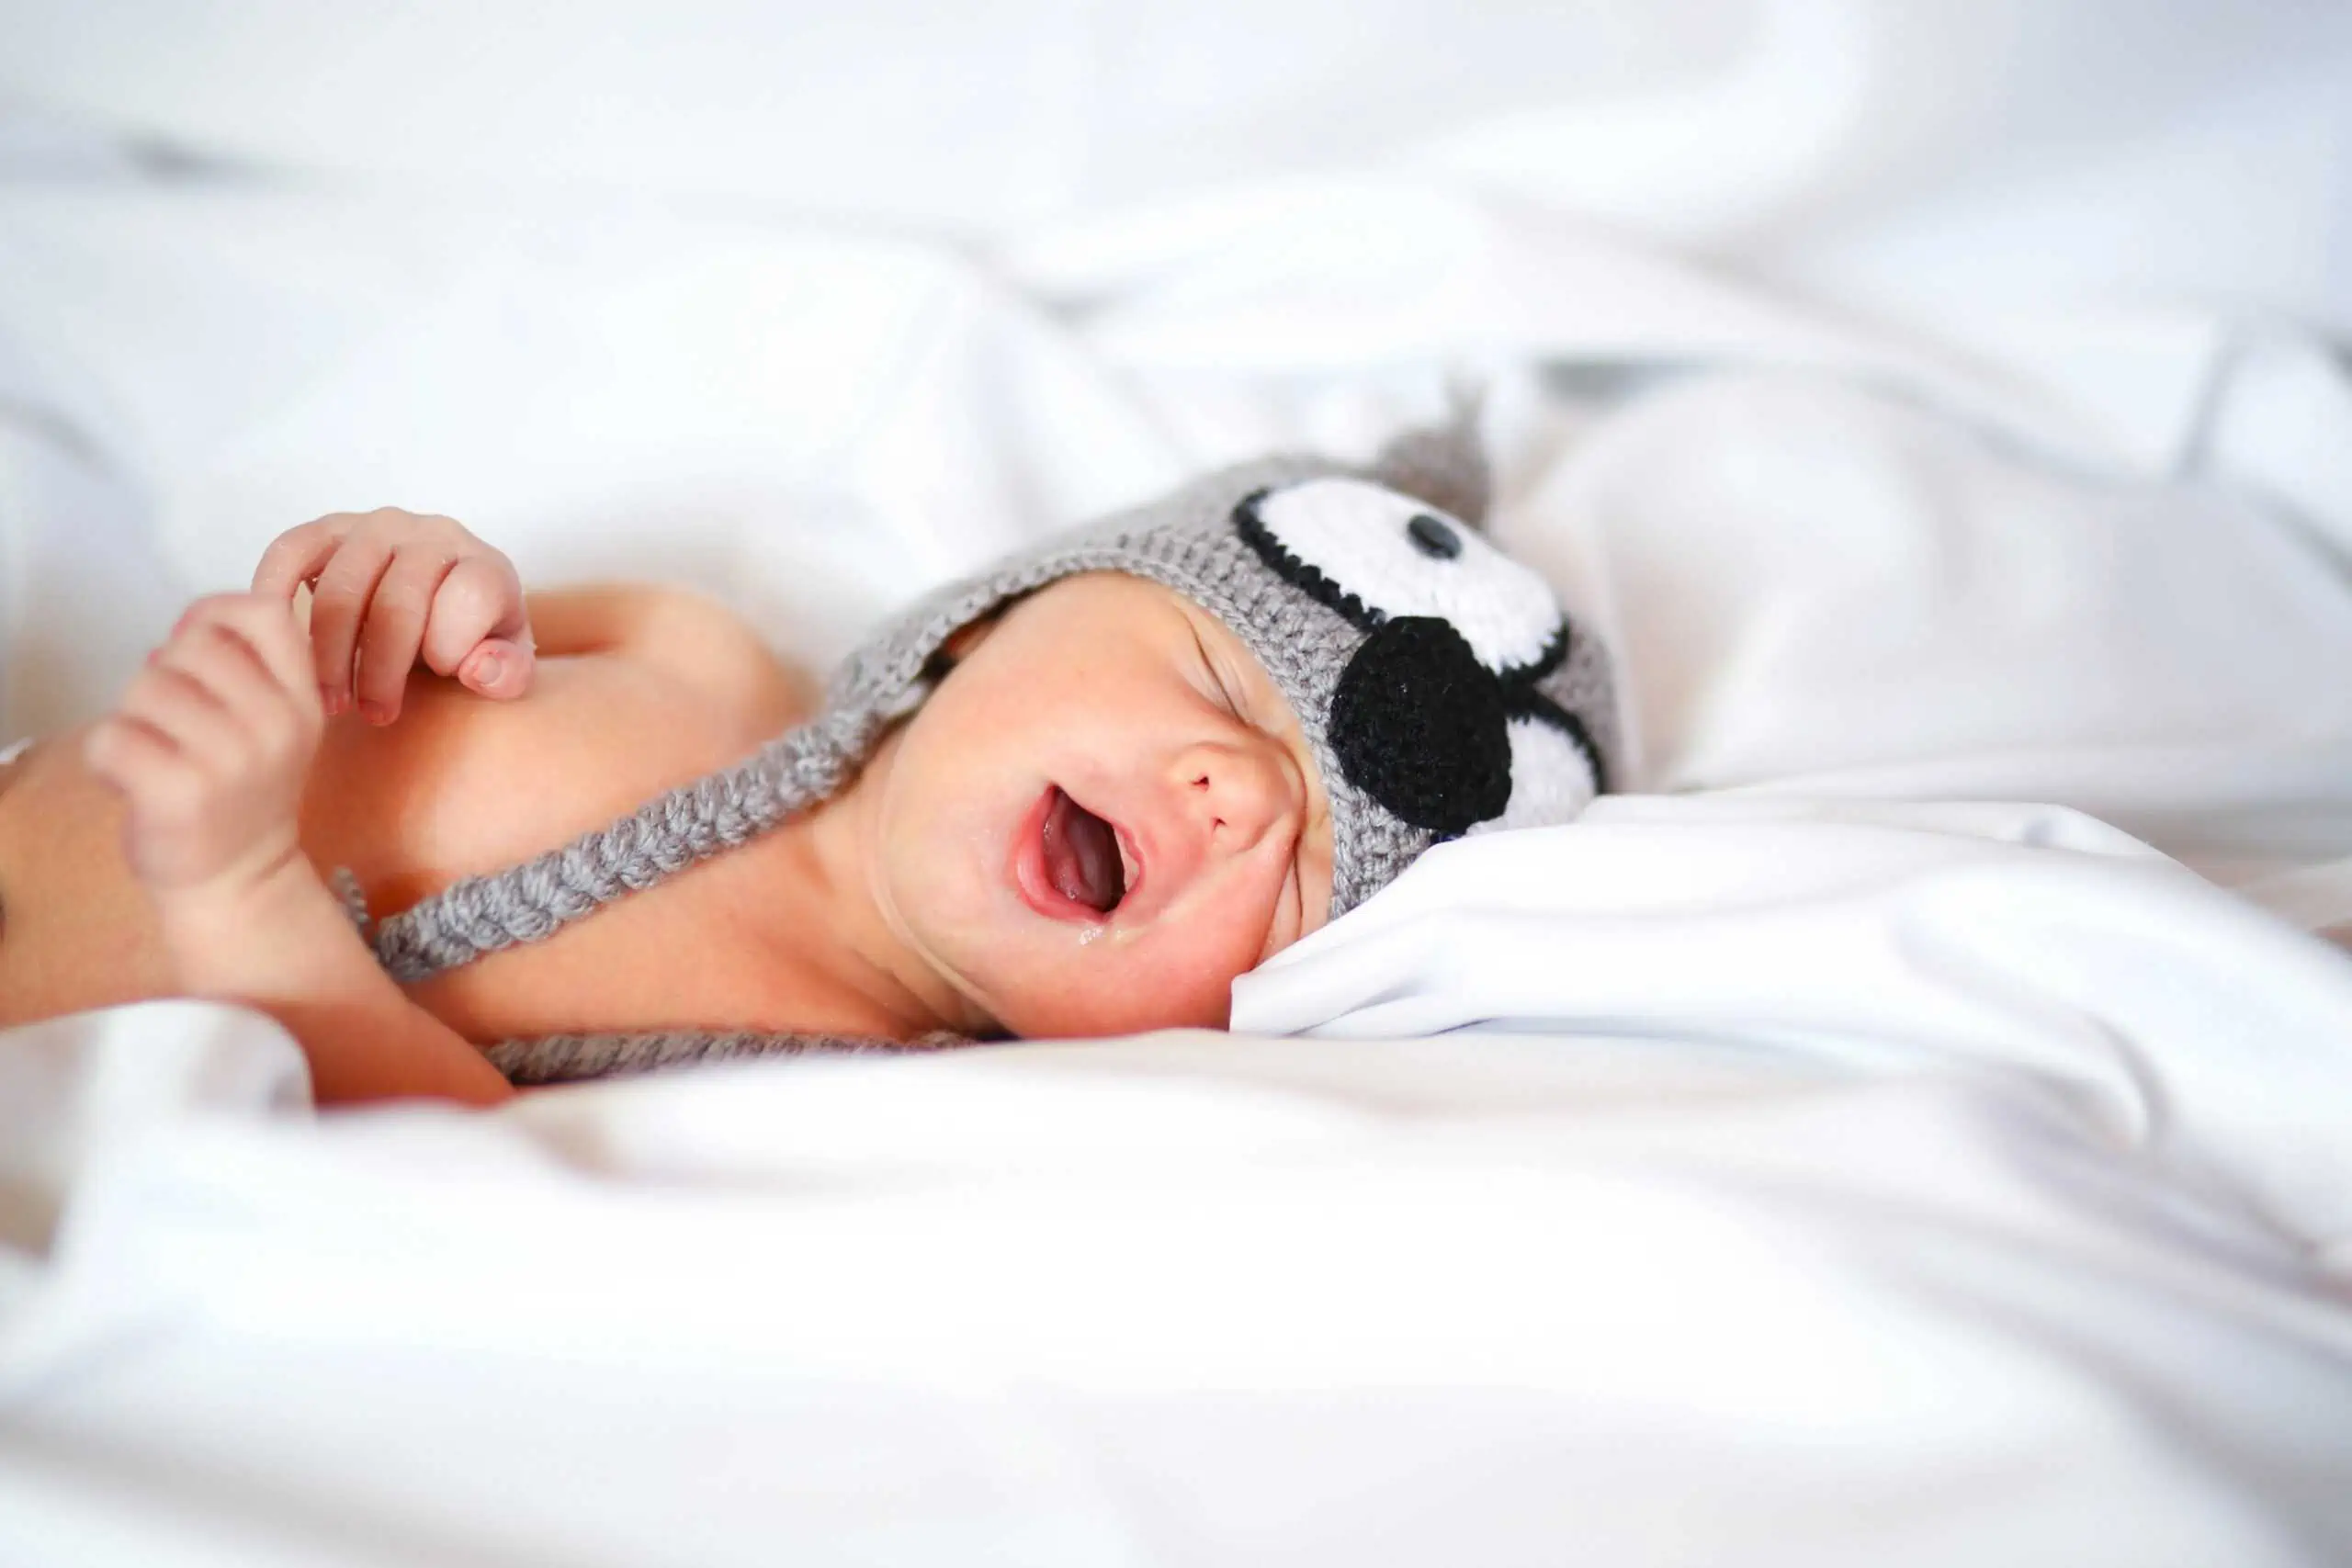 Sleeping baby with knitted headwear